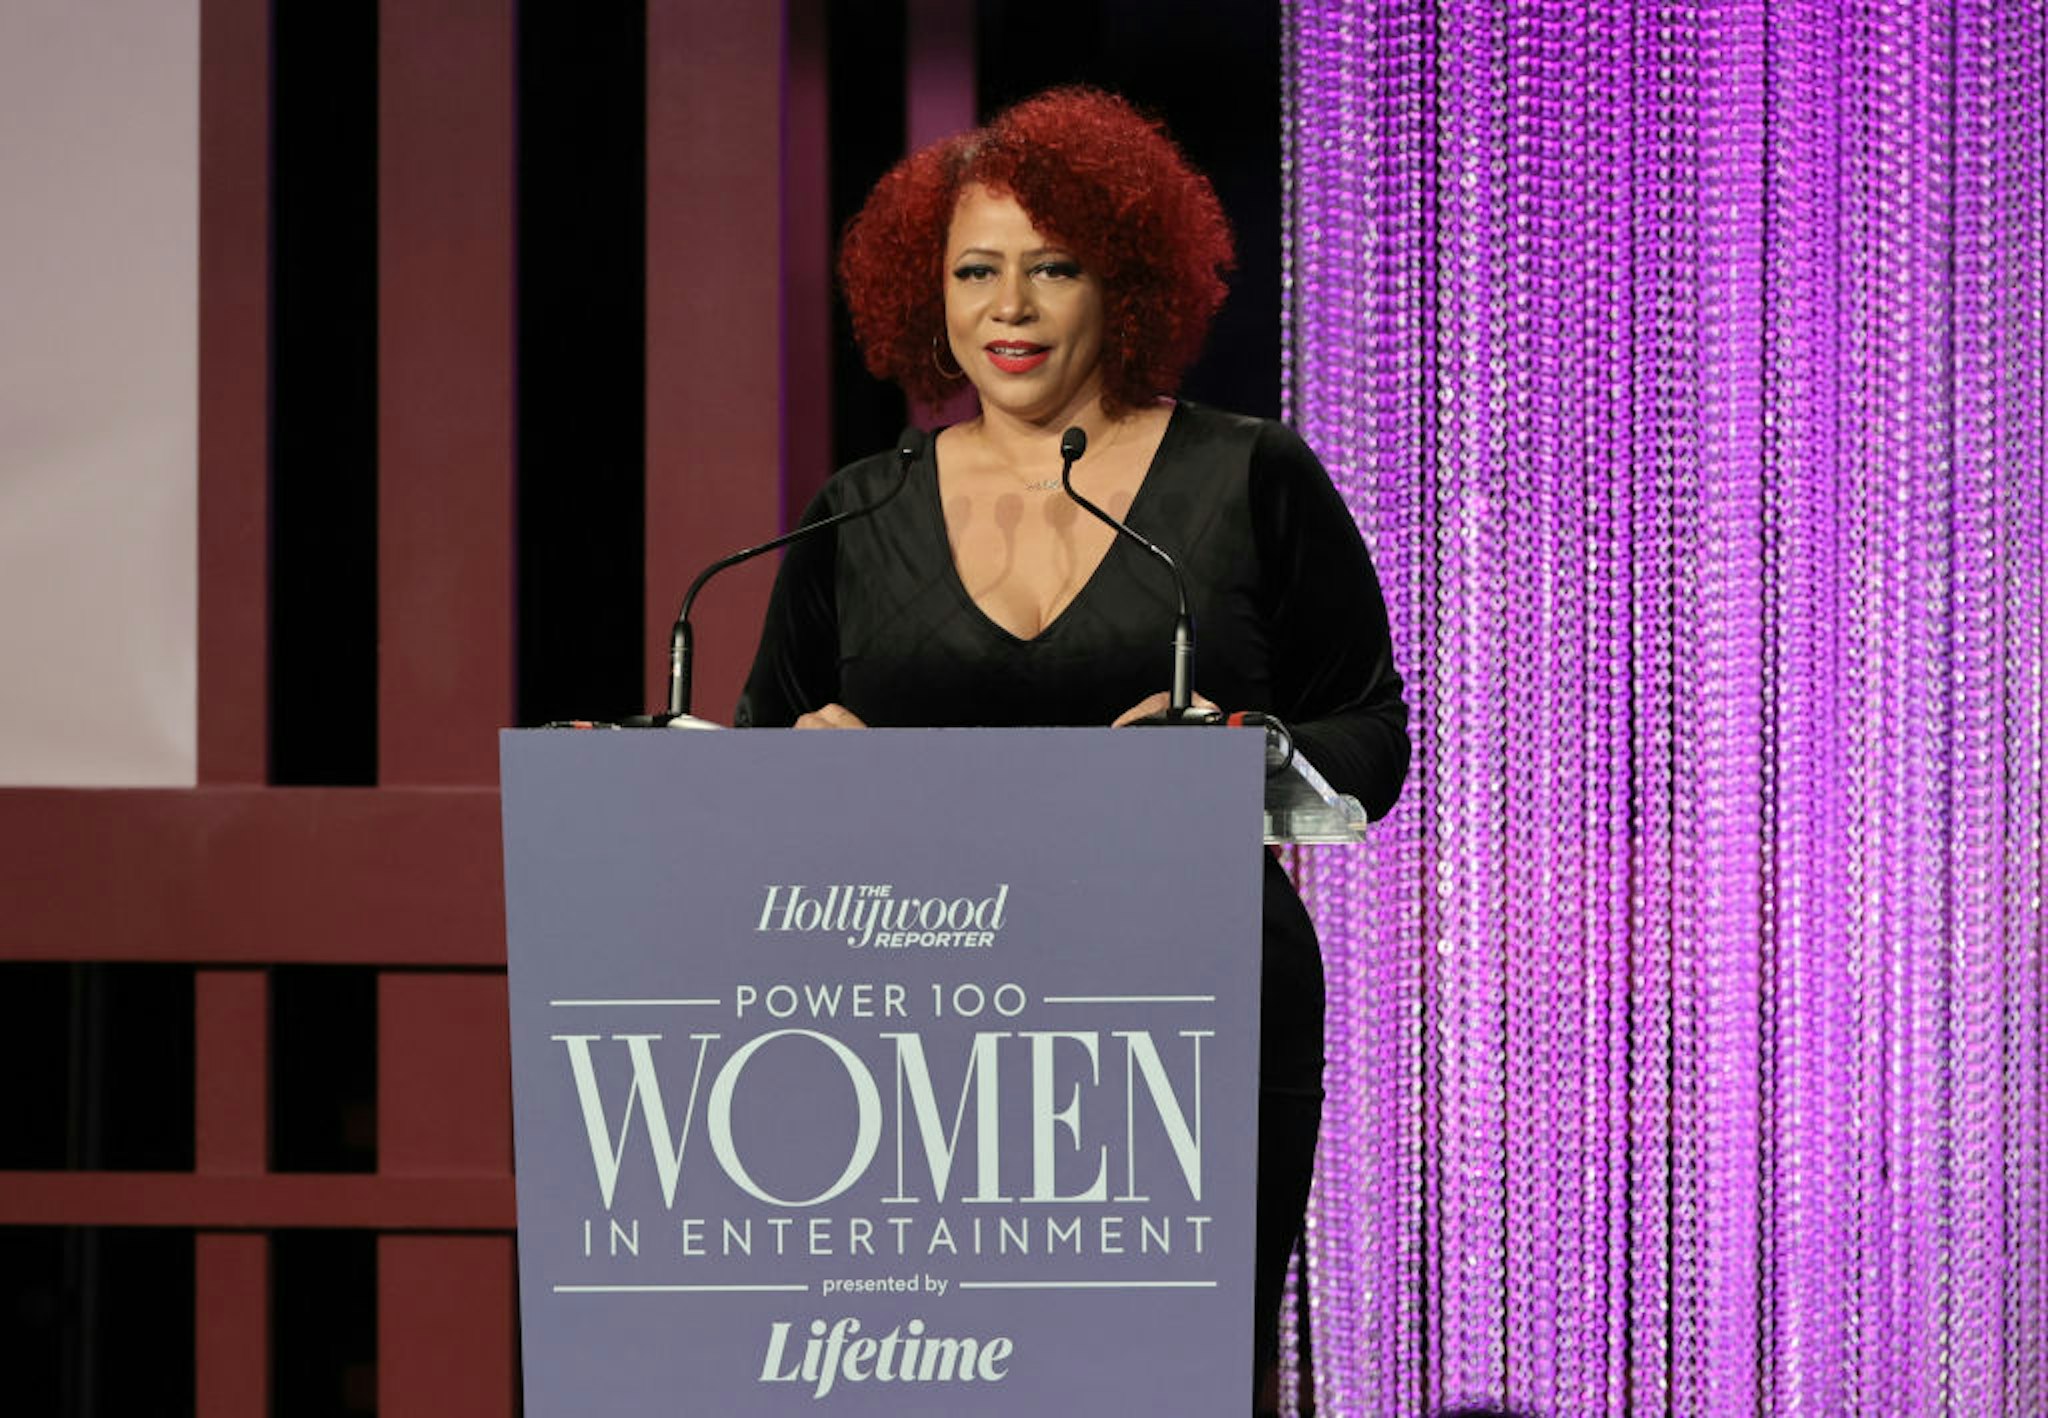 LOS ANGELES, CALIFORNIA - DECEMBER 08: Nikole Hannah-Jones speaks onstage at The Hollywood Reporter 2021 Power 100 Women in Entertainment, presented by Lifetime at Fairmont Century Plaza on December 08, 2021 in Los Angeles, California.